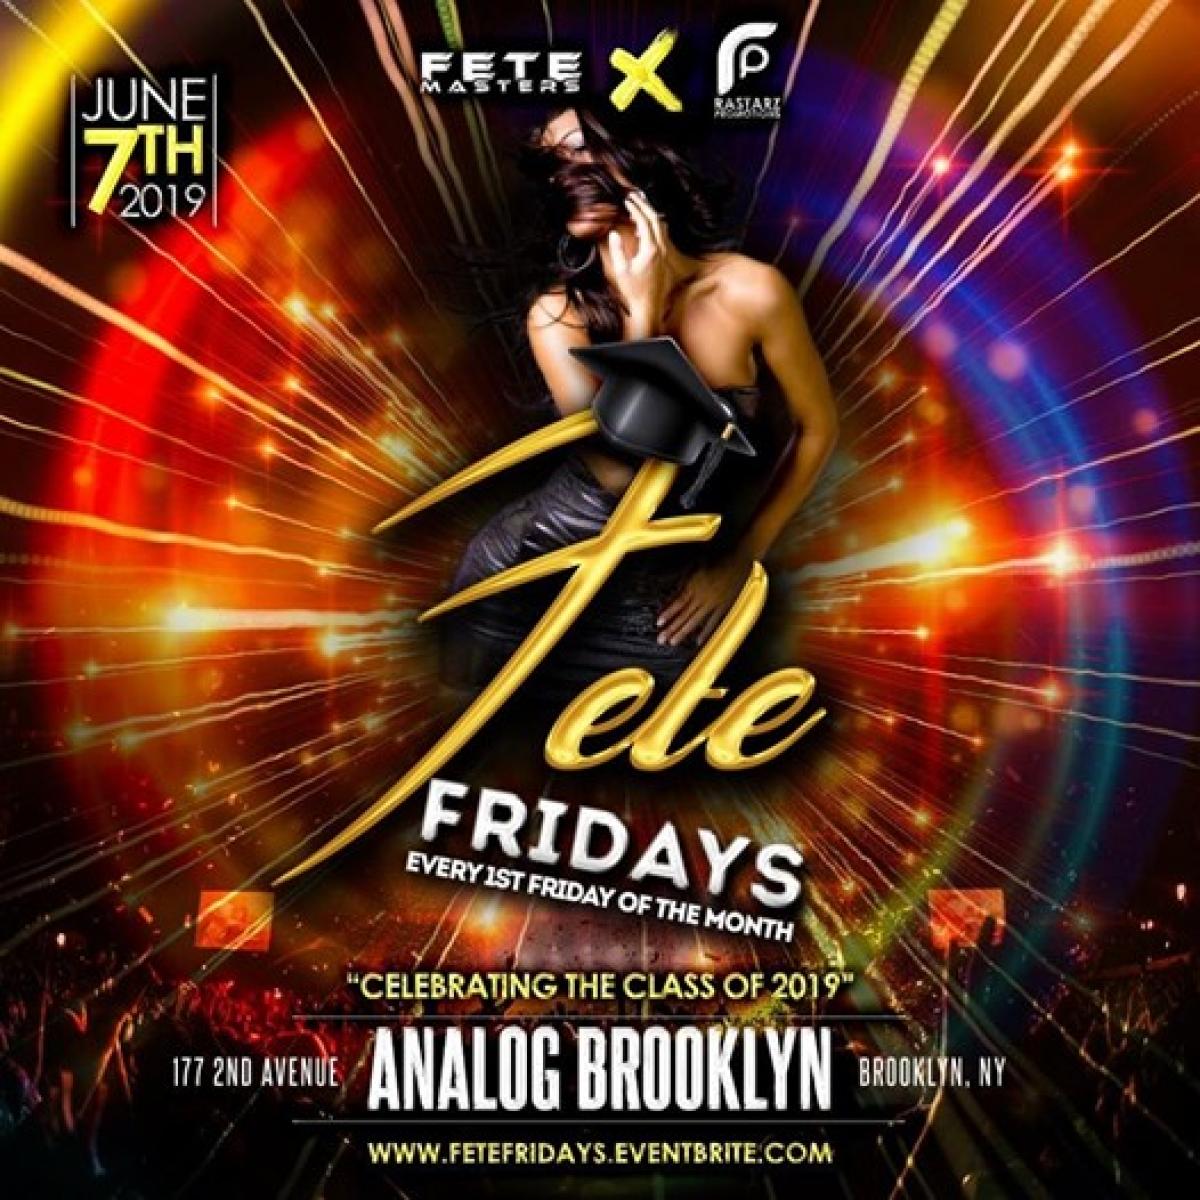 Fete Fridays flyer or main visual.